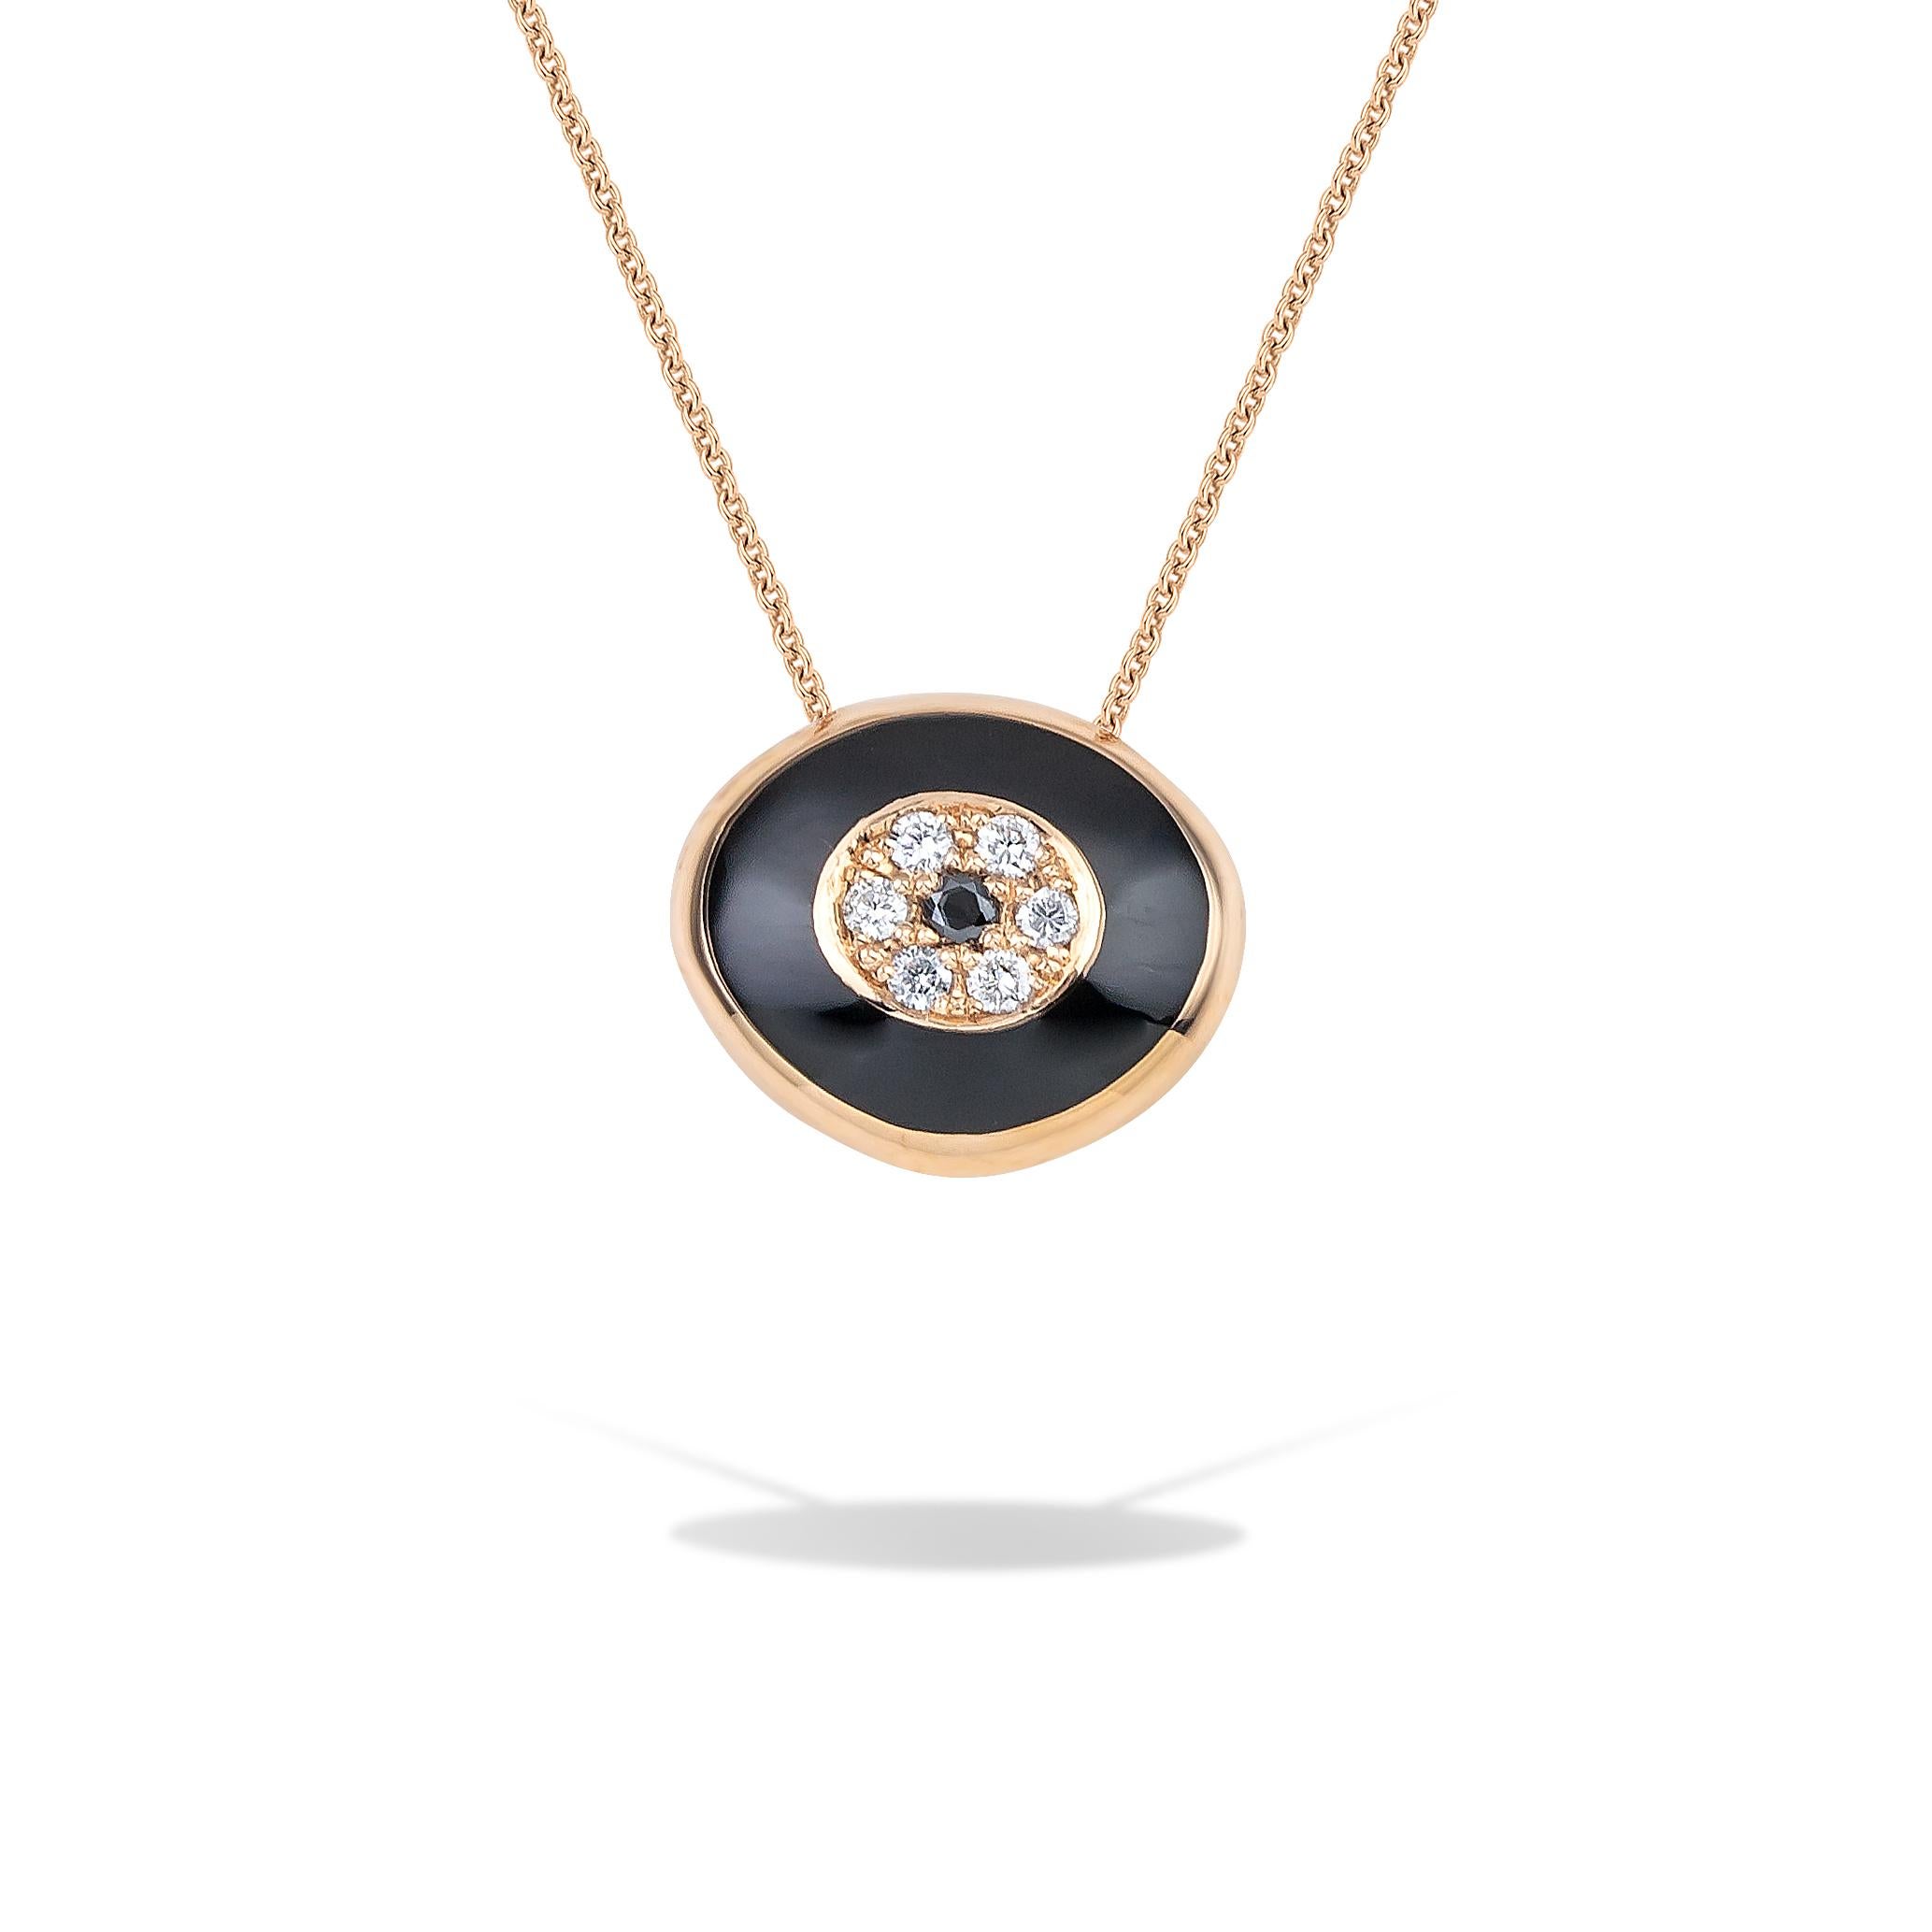 Greek Evil Eye pendant necklace in 18kt rose gold with black enamel, white brilliant cut diamonds and a central black diamond.
In the greek culture the evil eye protects the one who wears it from the negative energy and stops the bad thoughts from